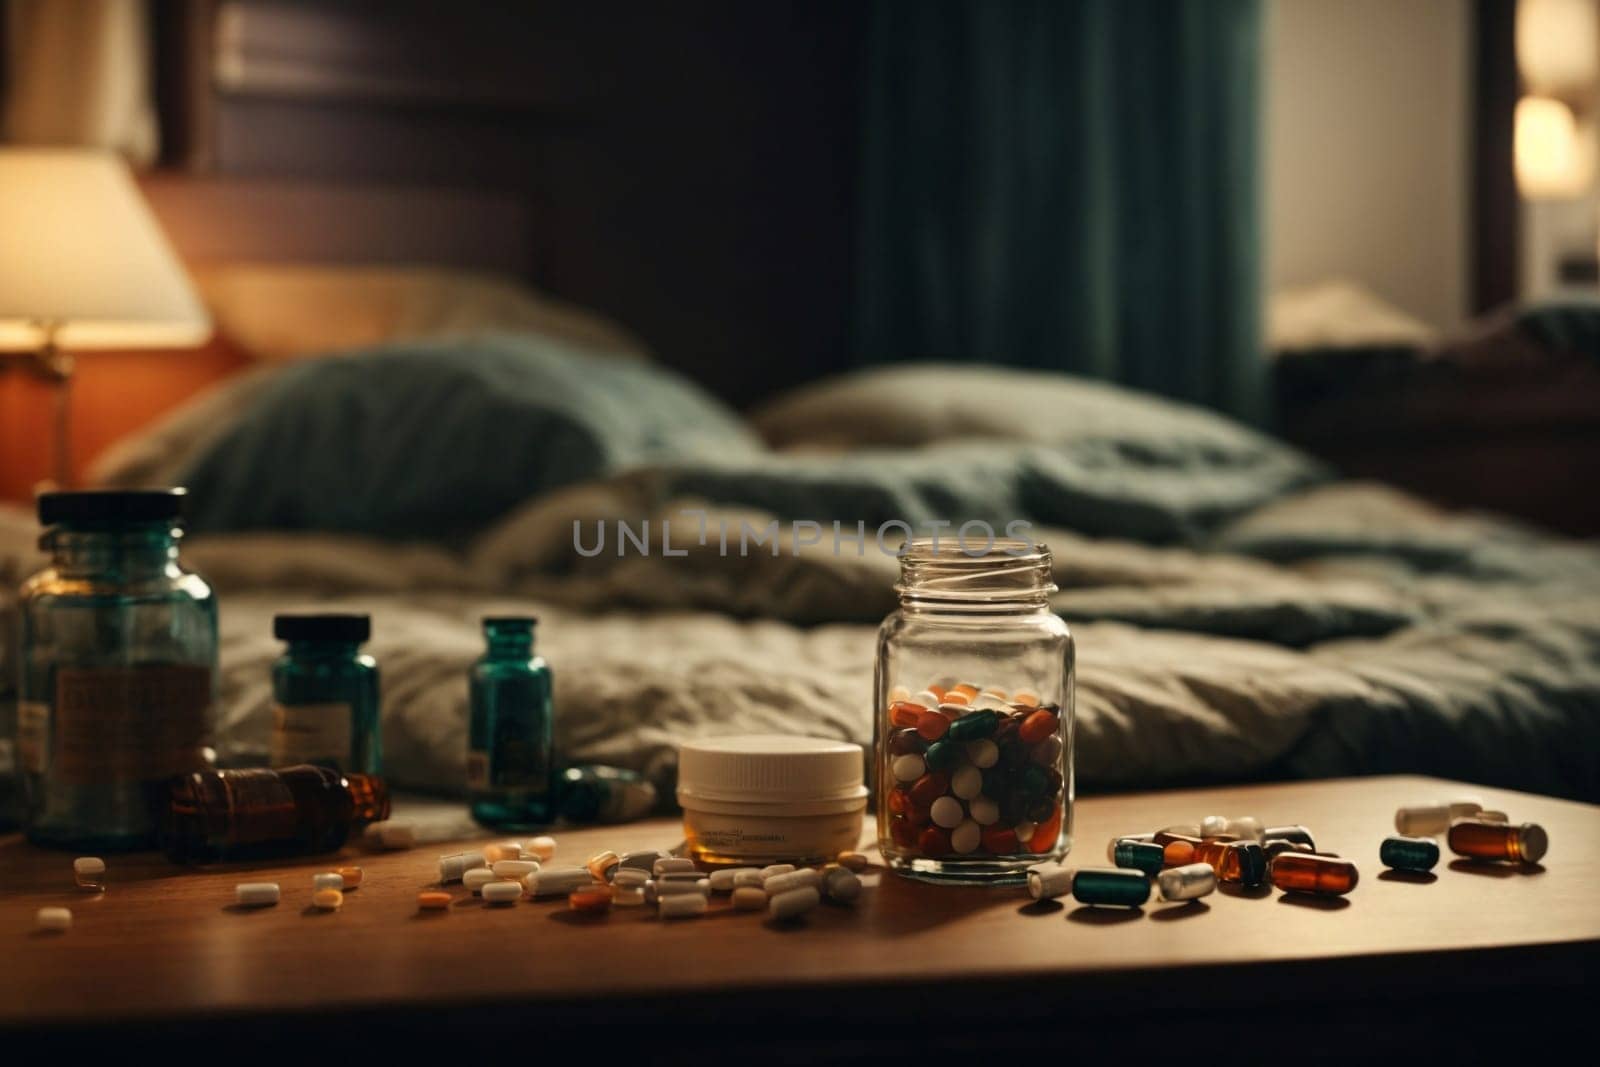 A wooden table is filled with a diverse assortment of pills, creating a stark visual representation of medication options and possibilities.